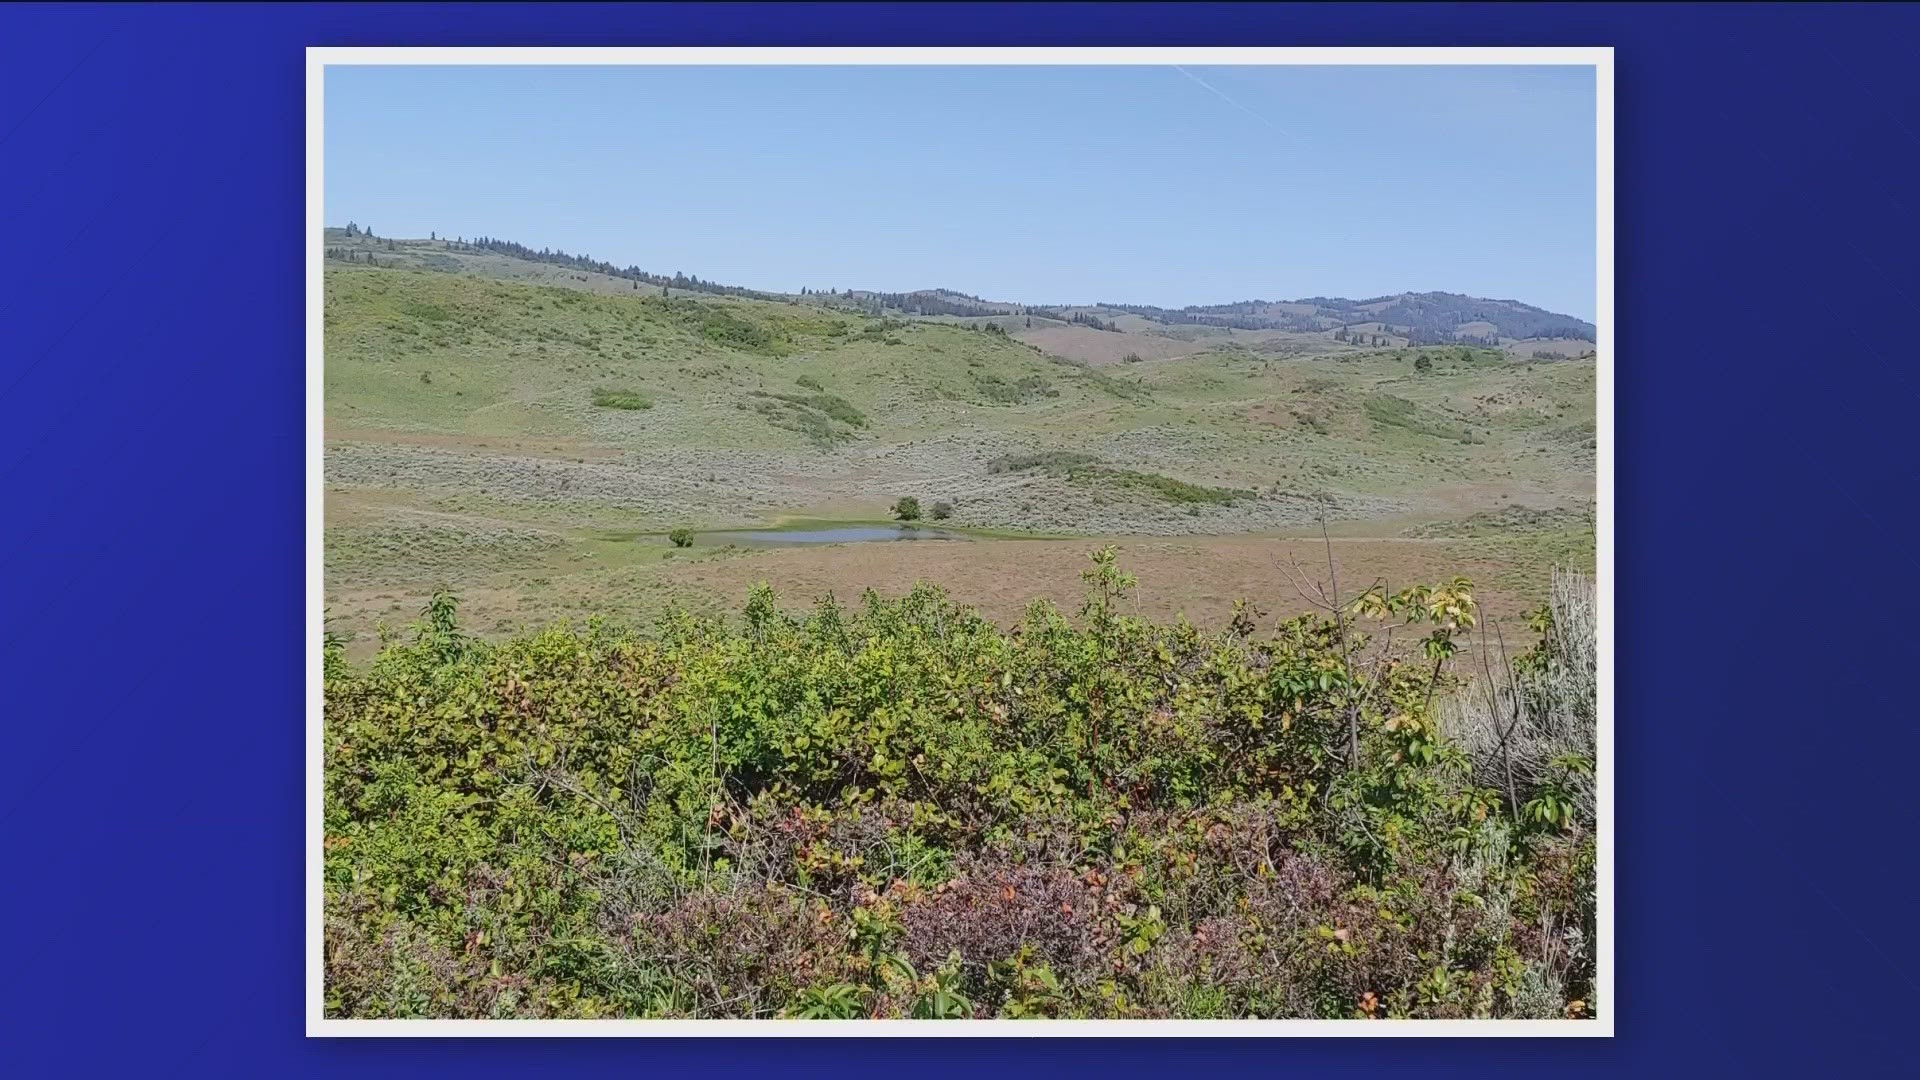 The Bureau of Land Management announced it purchased 390 acres of land near Midvale to preserve critical habitat protection for Columbian sharp-tailed grouse.